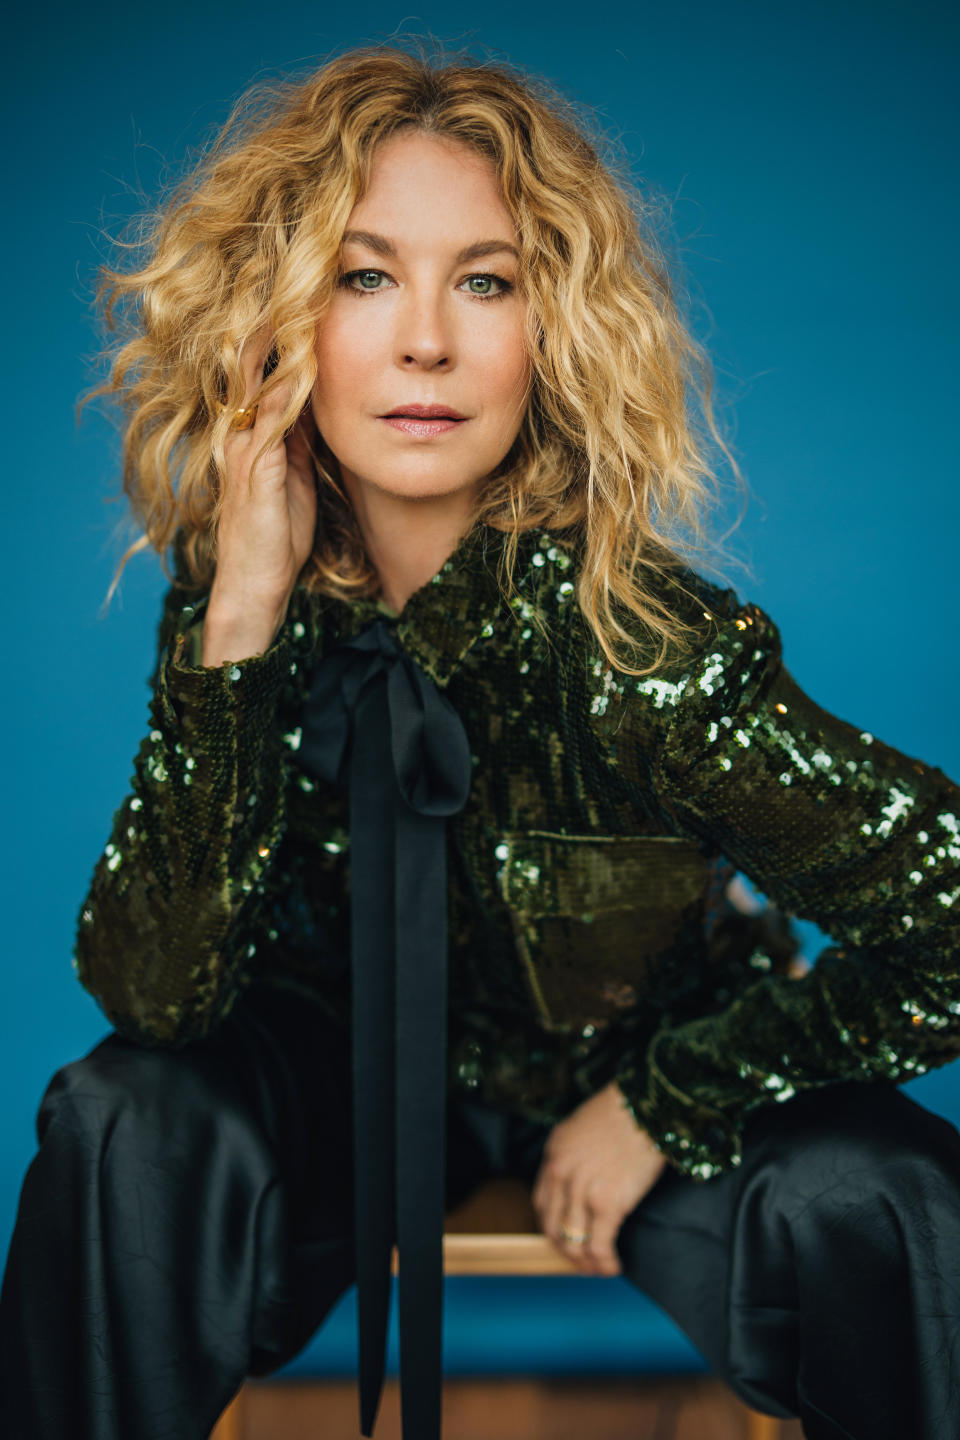 Jenna Elfman shares her philosophy on parenting her two boys, 11-year-old Easton and 14-year-old Story.  (Credit: Amanda Elkins)